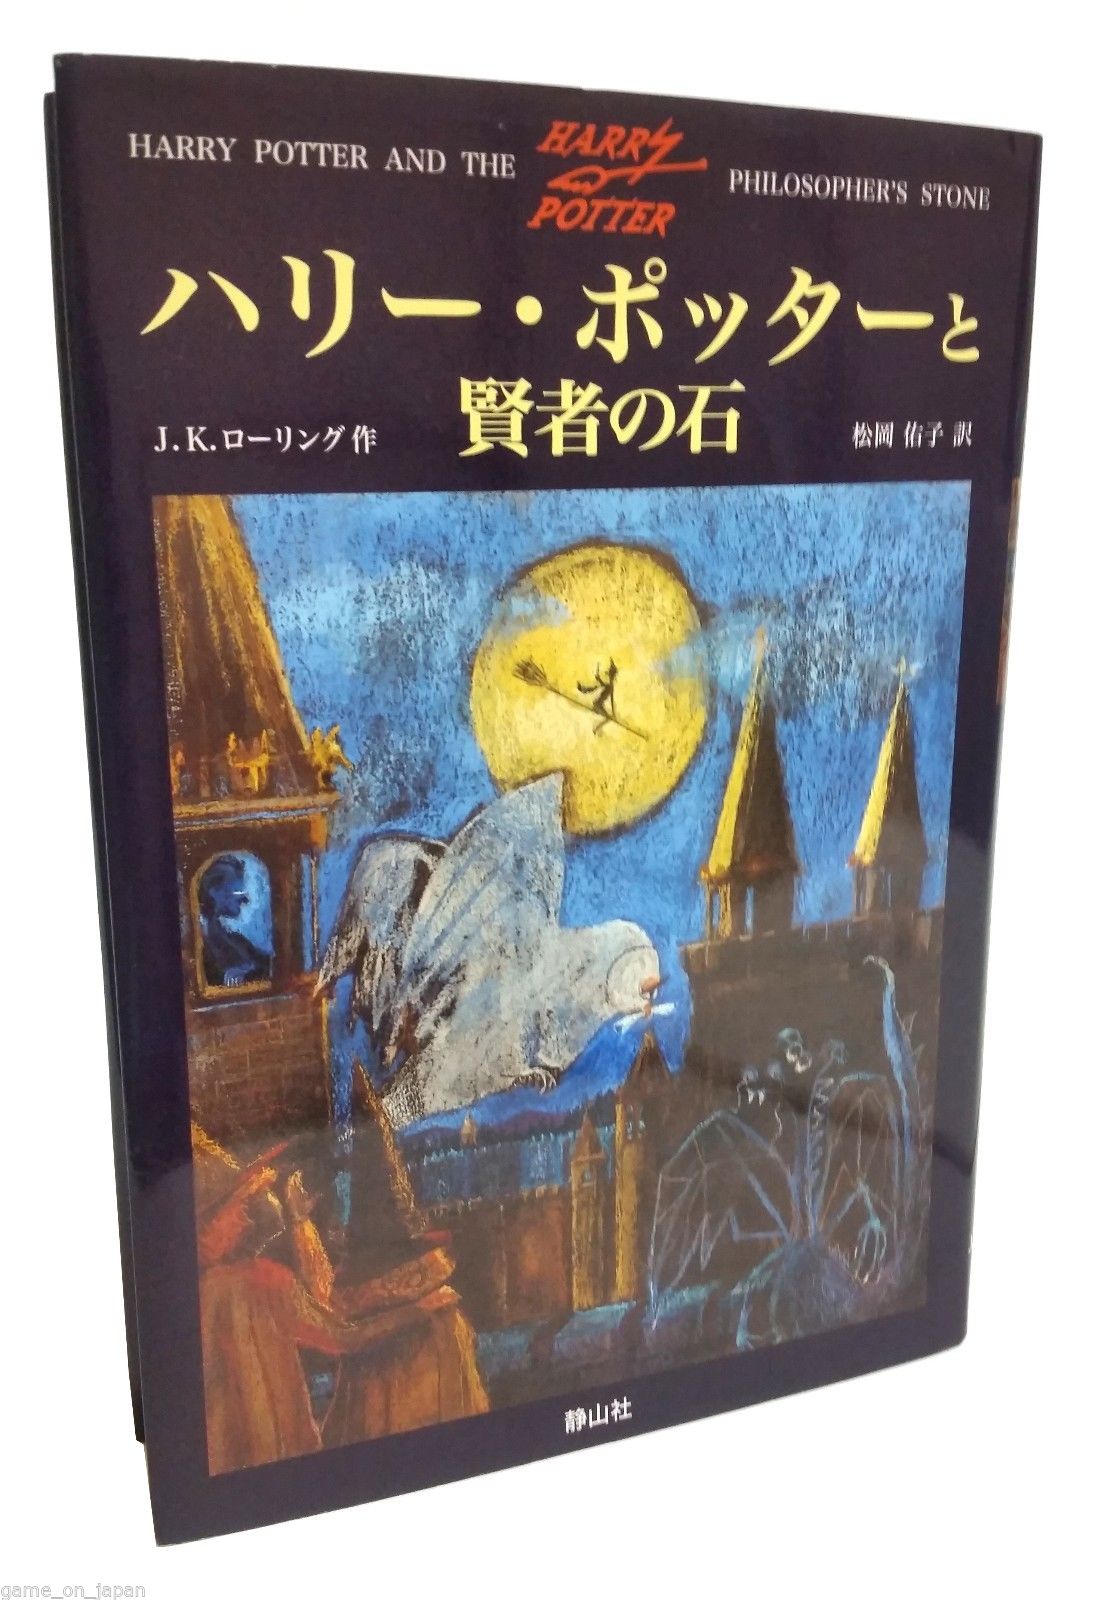 Harry Potter and the Philosopher's Stone Book 1 in Japanese